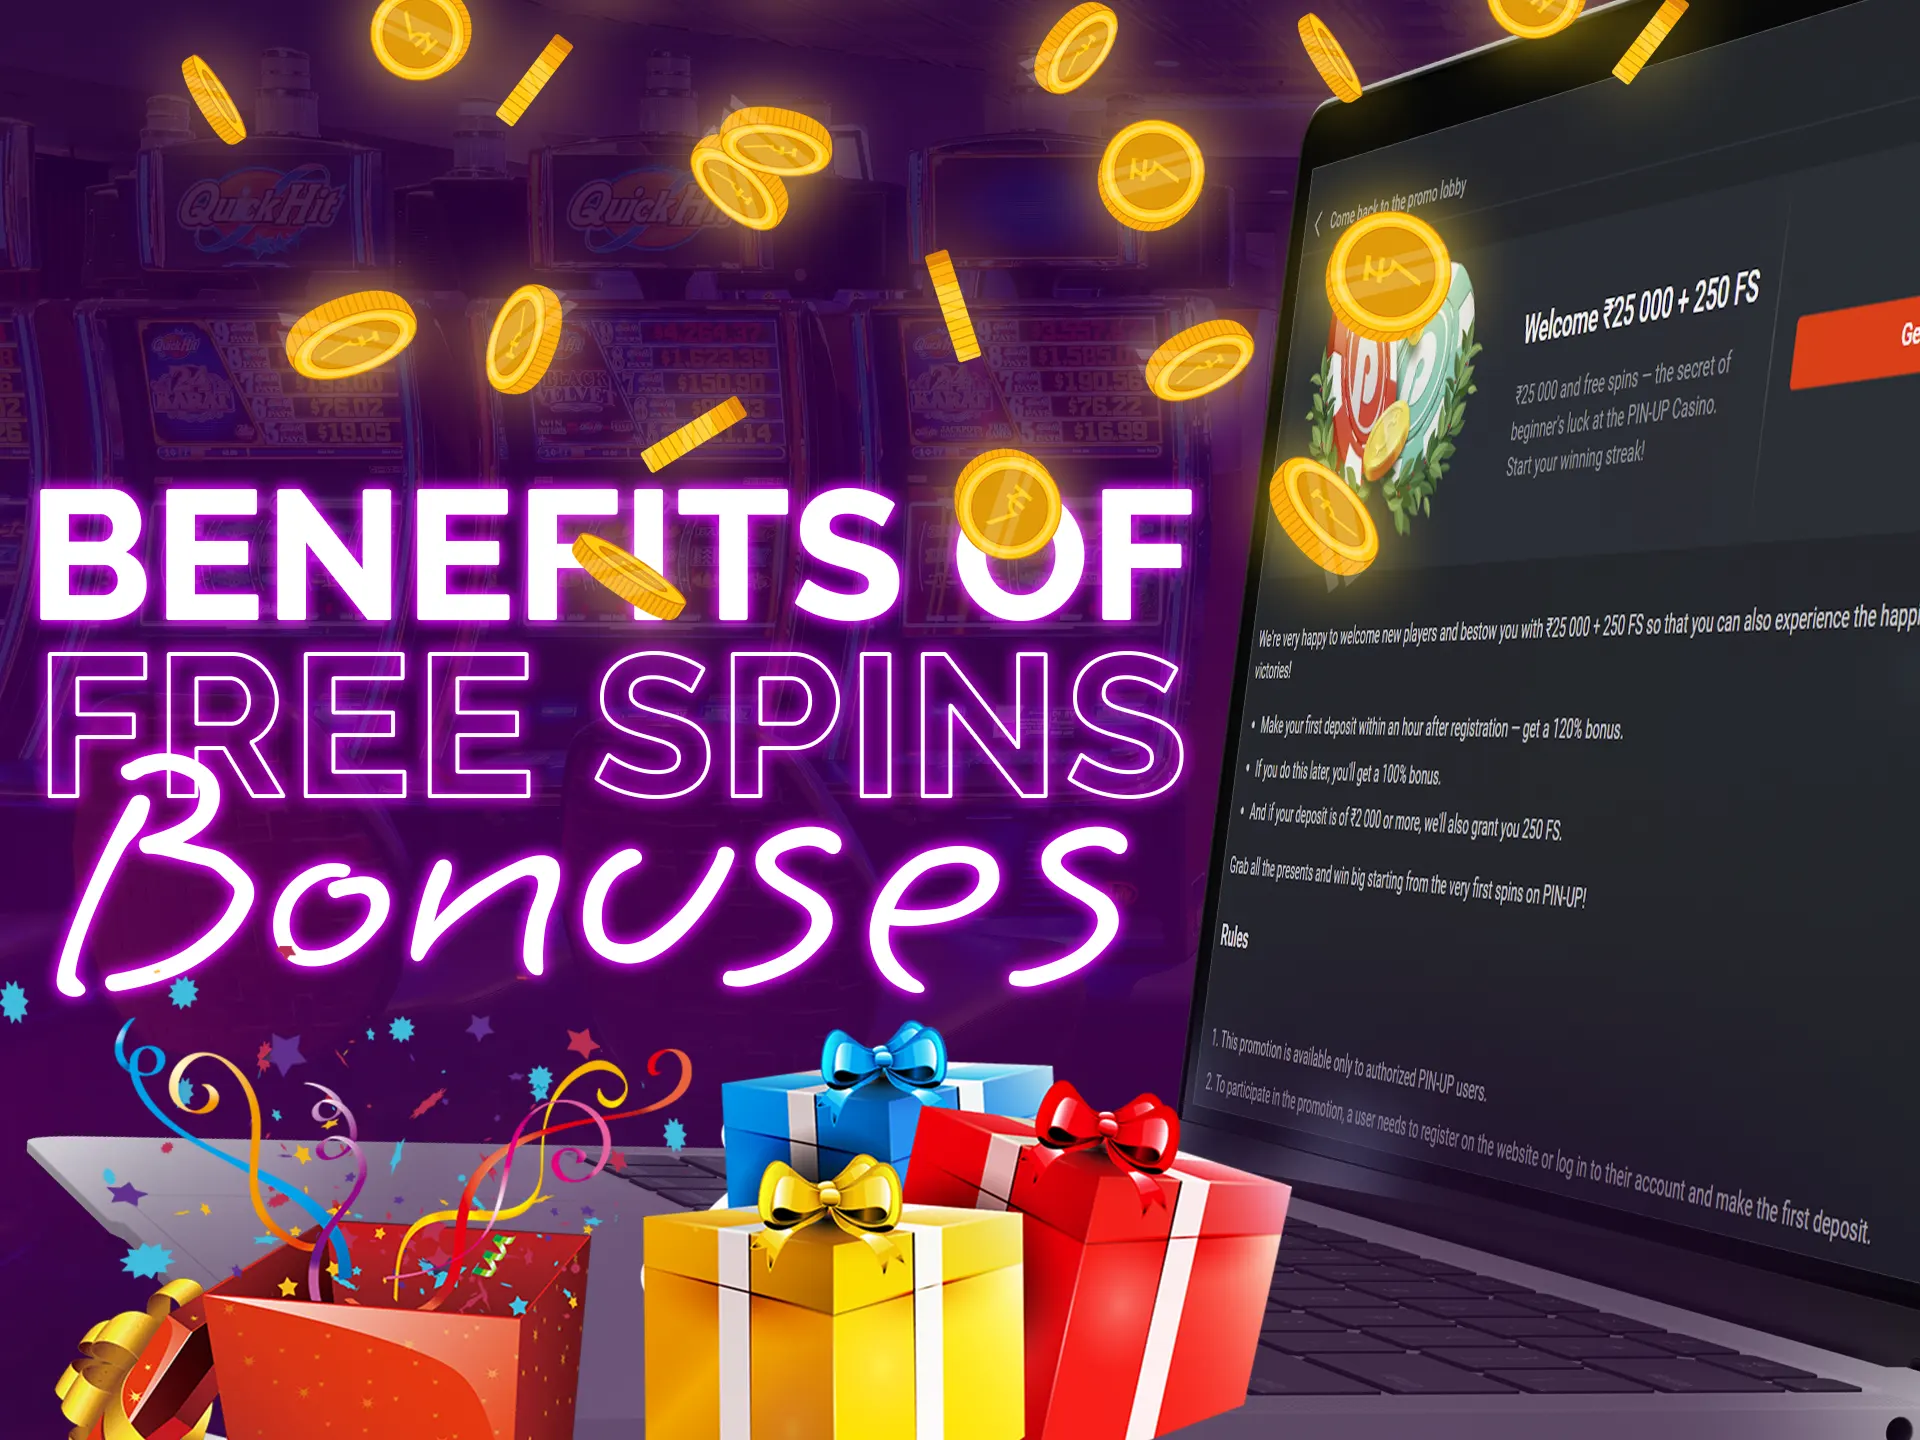 Get amazing benefits with free spins bonuses.